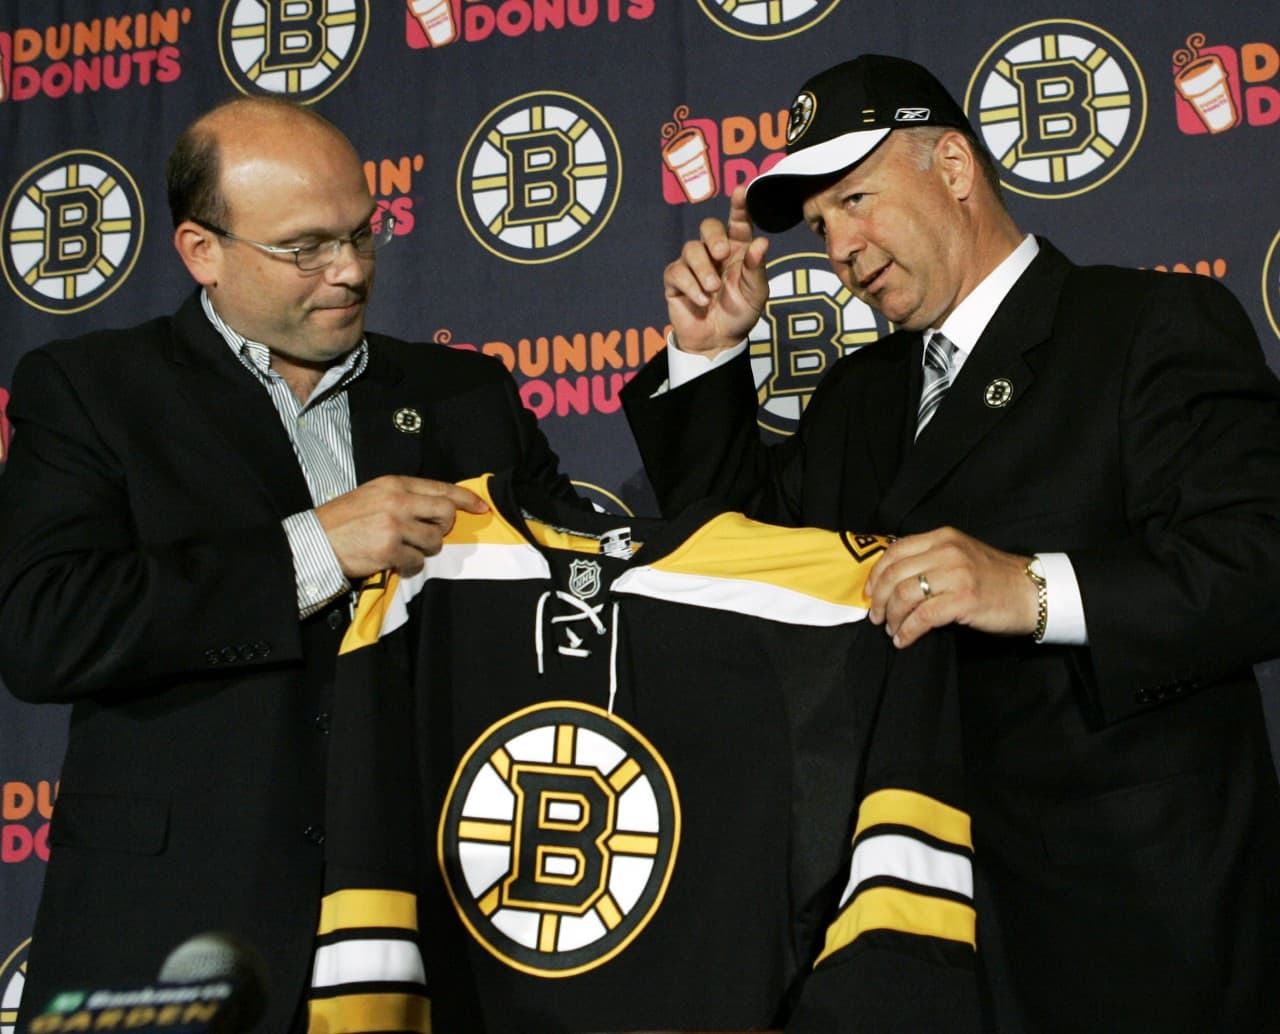 Boston Bruins hockey head coach Claude Julien, right, puts a team cap on and holds a jersey with Bruins General Manager Peter Chiarelli at a news conference in Boston Thursday, June 21, 2007. (Elise Amendola/AP)